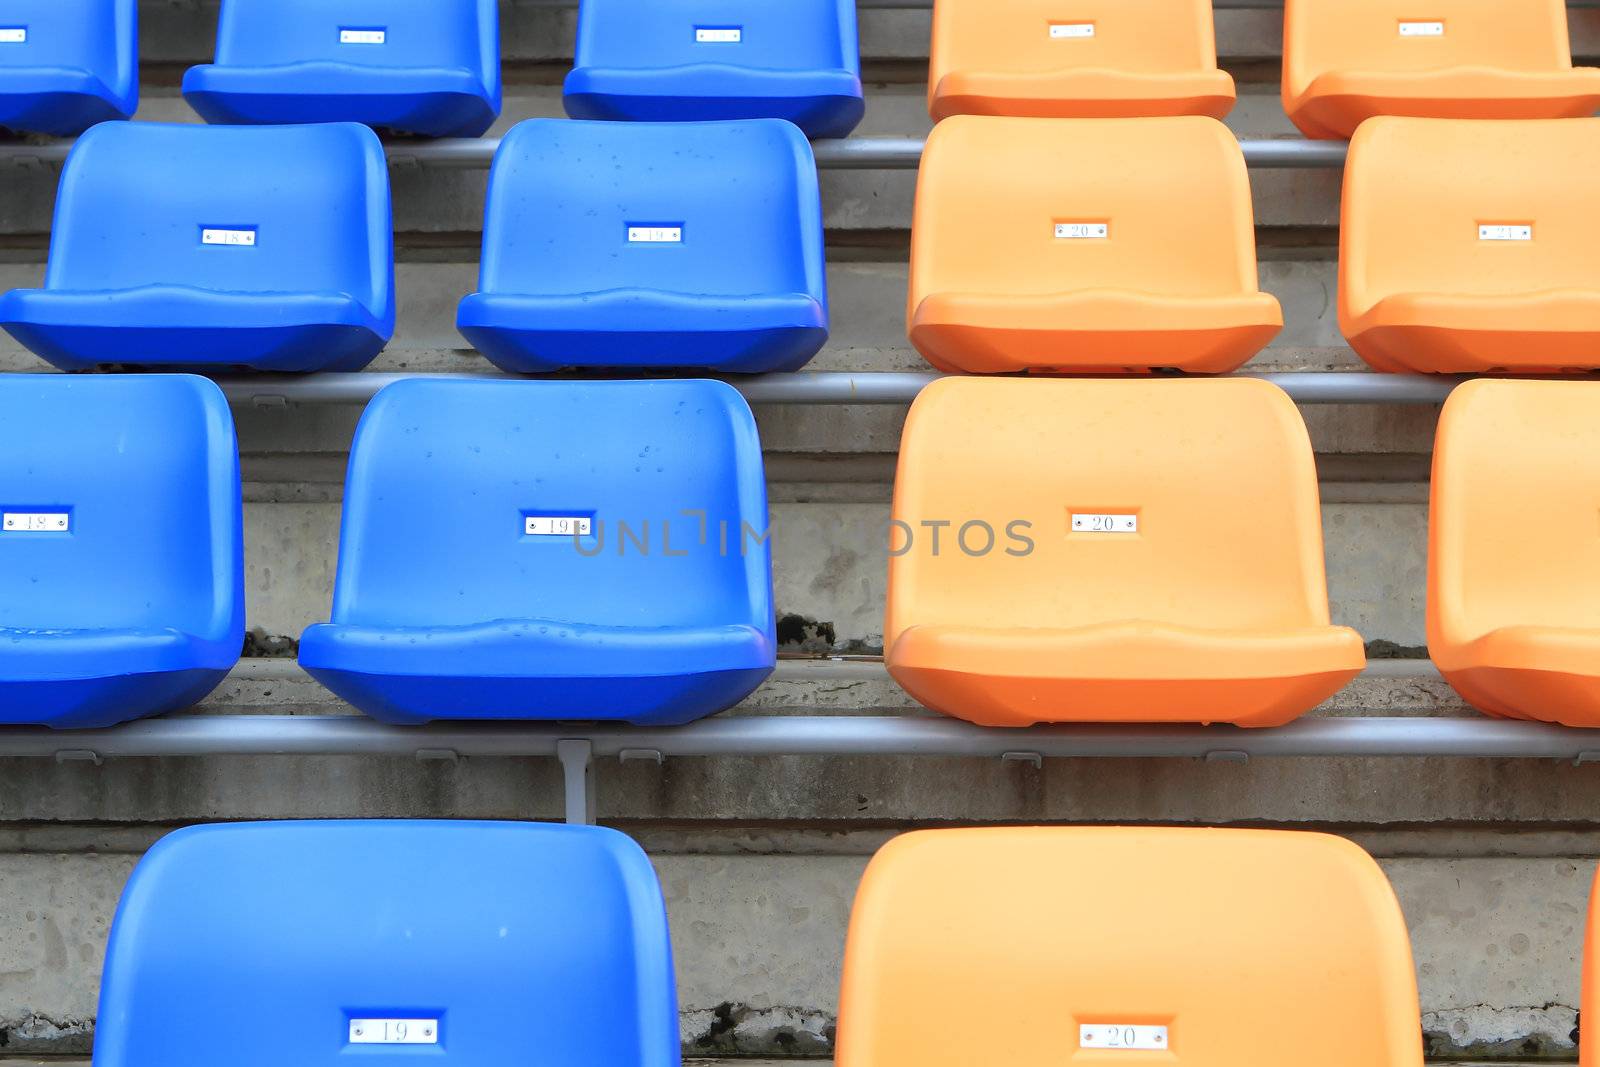 plastic, yellow and blue, new chairs in stadium. by rufous